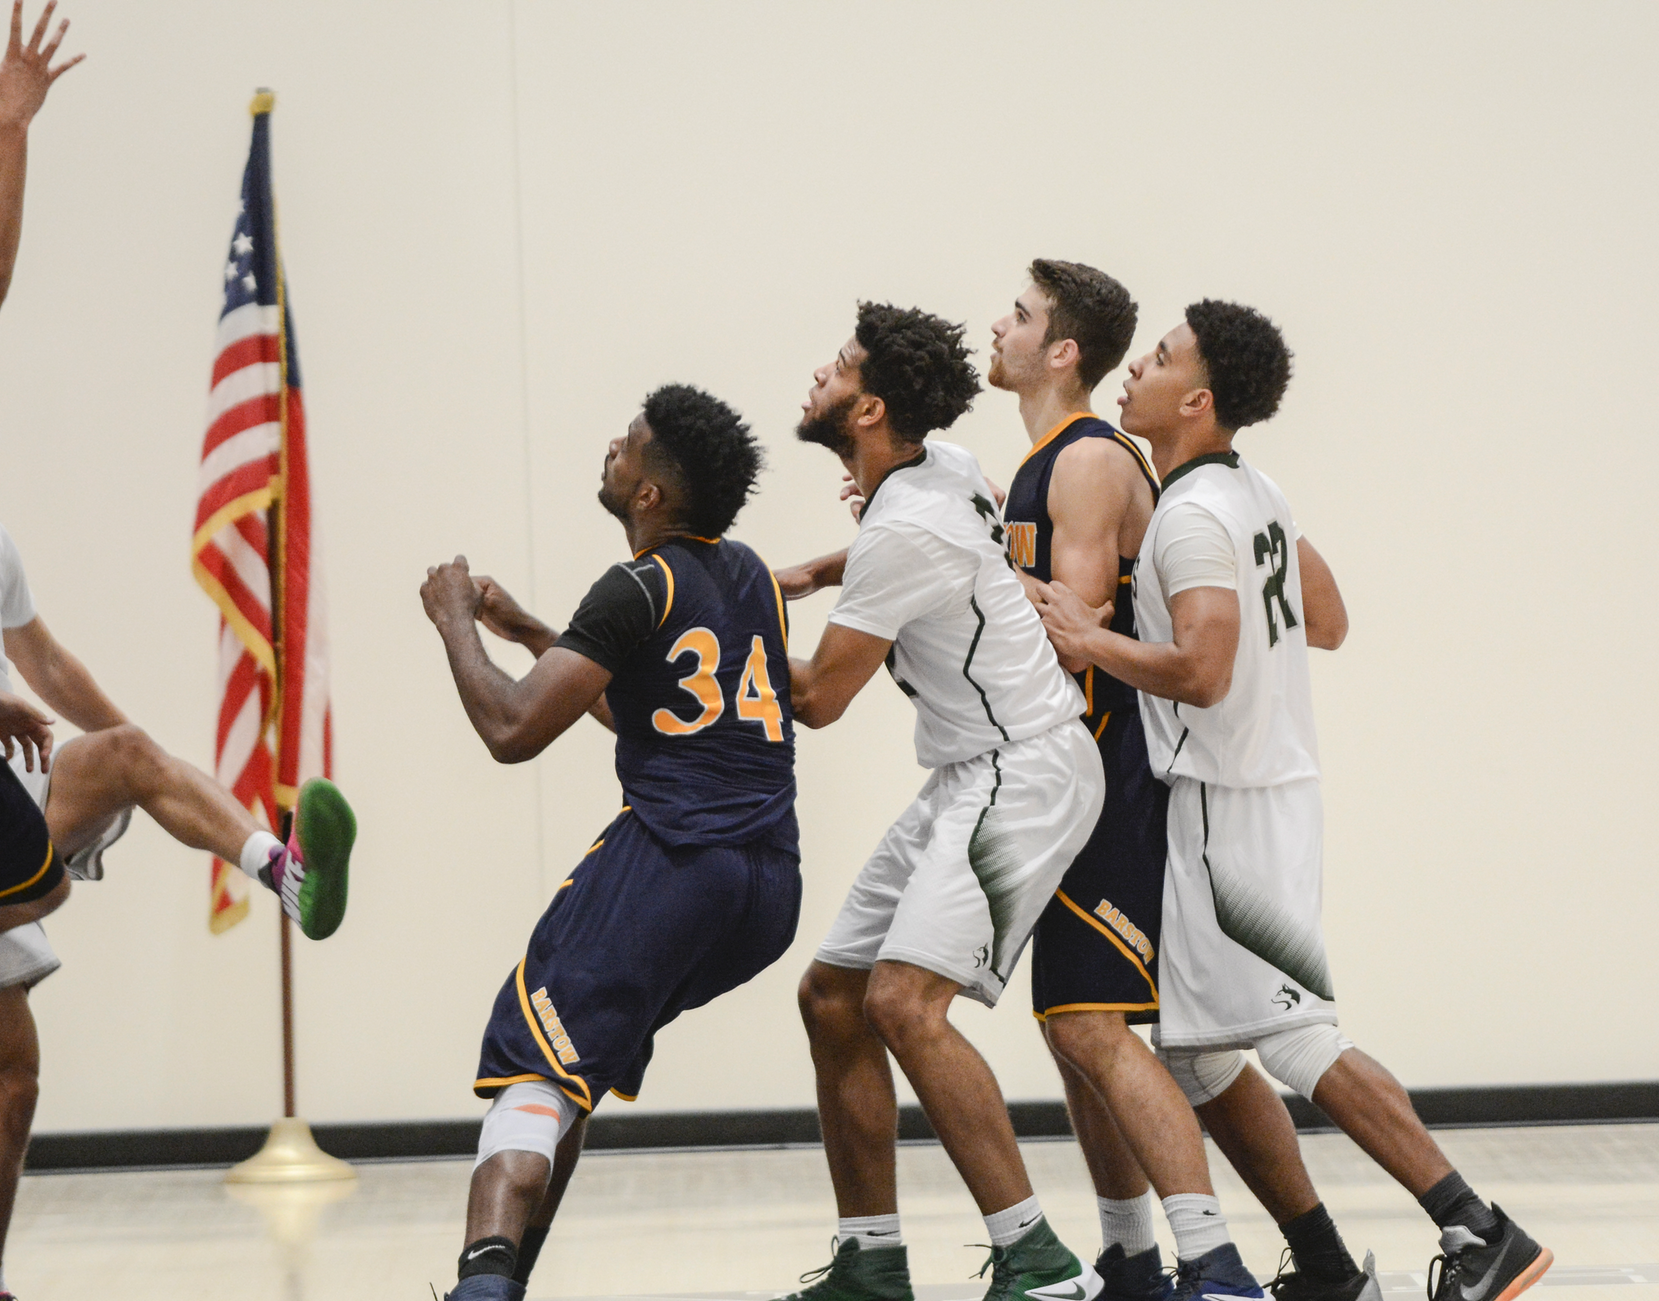 The ELAC men's basketball team defeats Barstow College (pictured) 101-85 en route to a second place finish at the Alvin Hunter Classic Tournament in San Bernardino. (Photo by Tadzio Garcia)